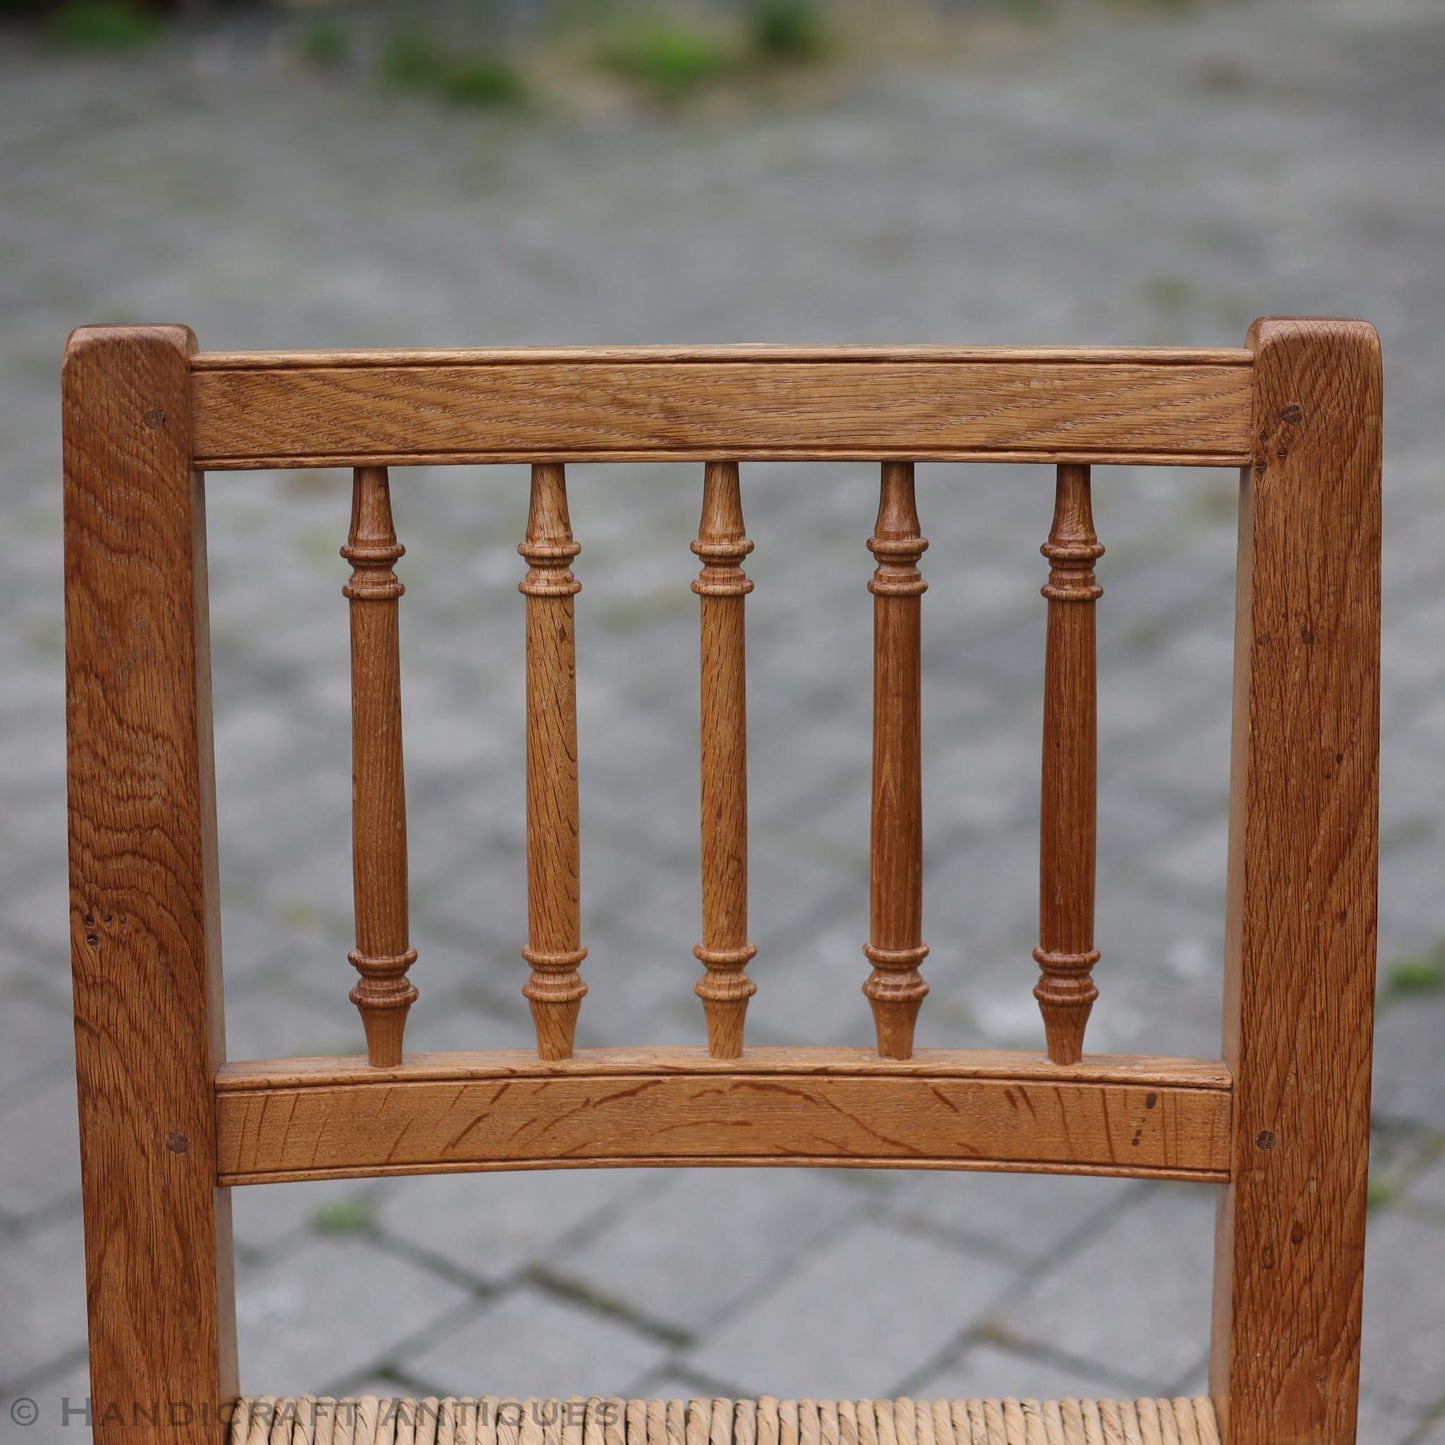 Peter Hall of Staveley Arts & Crafts Lakes School Turned Leg English Oak Chair 1978.